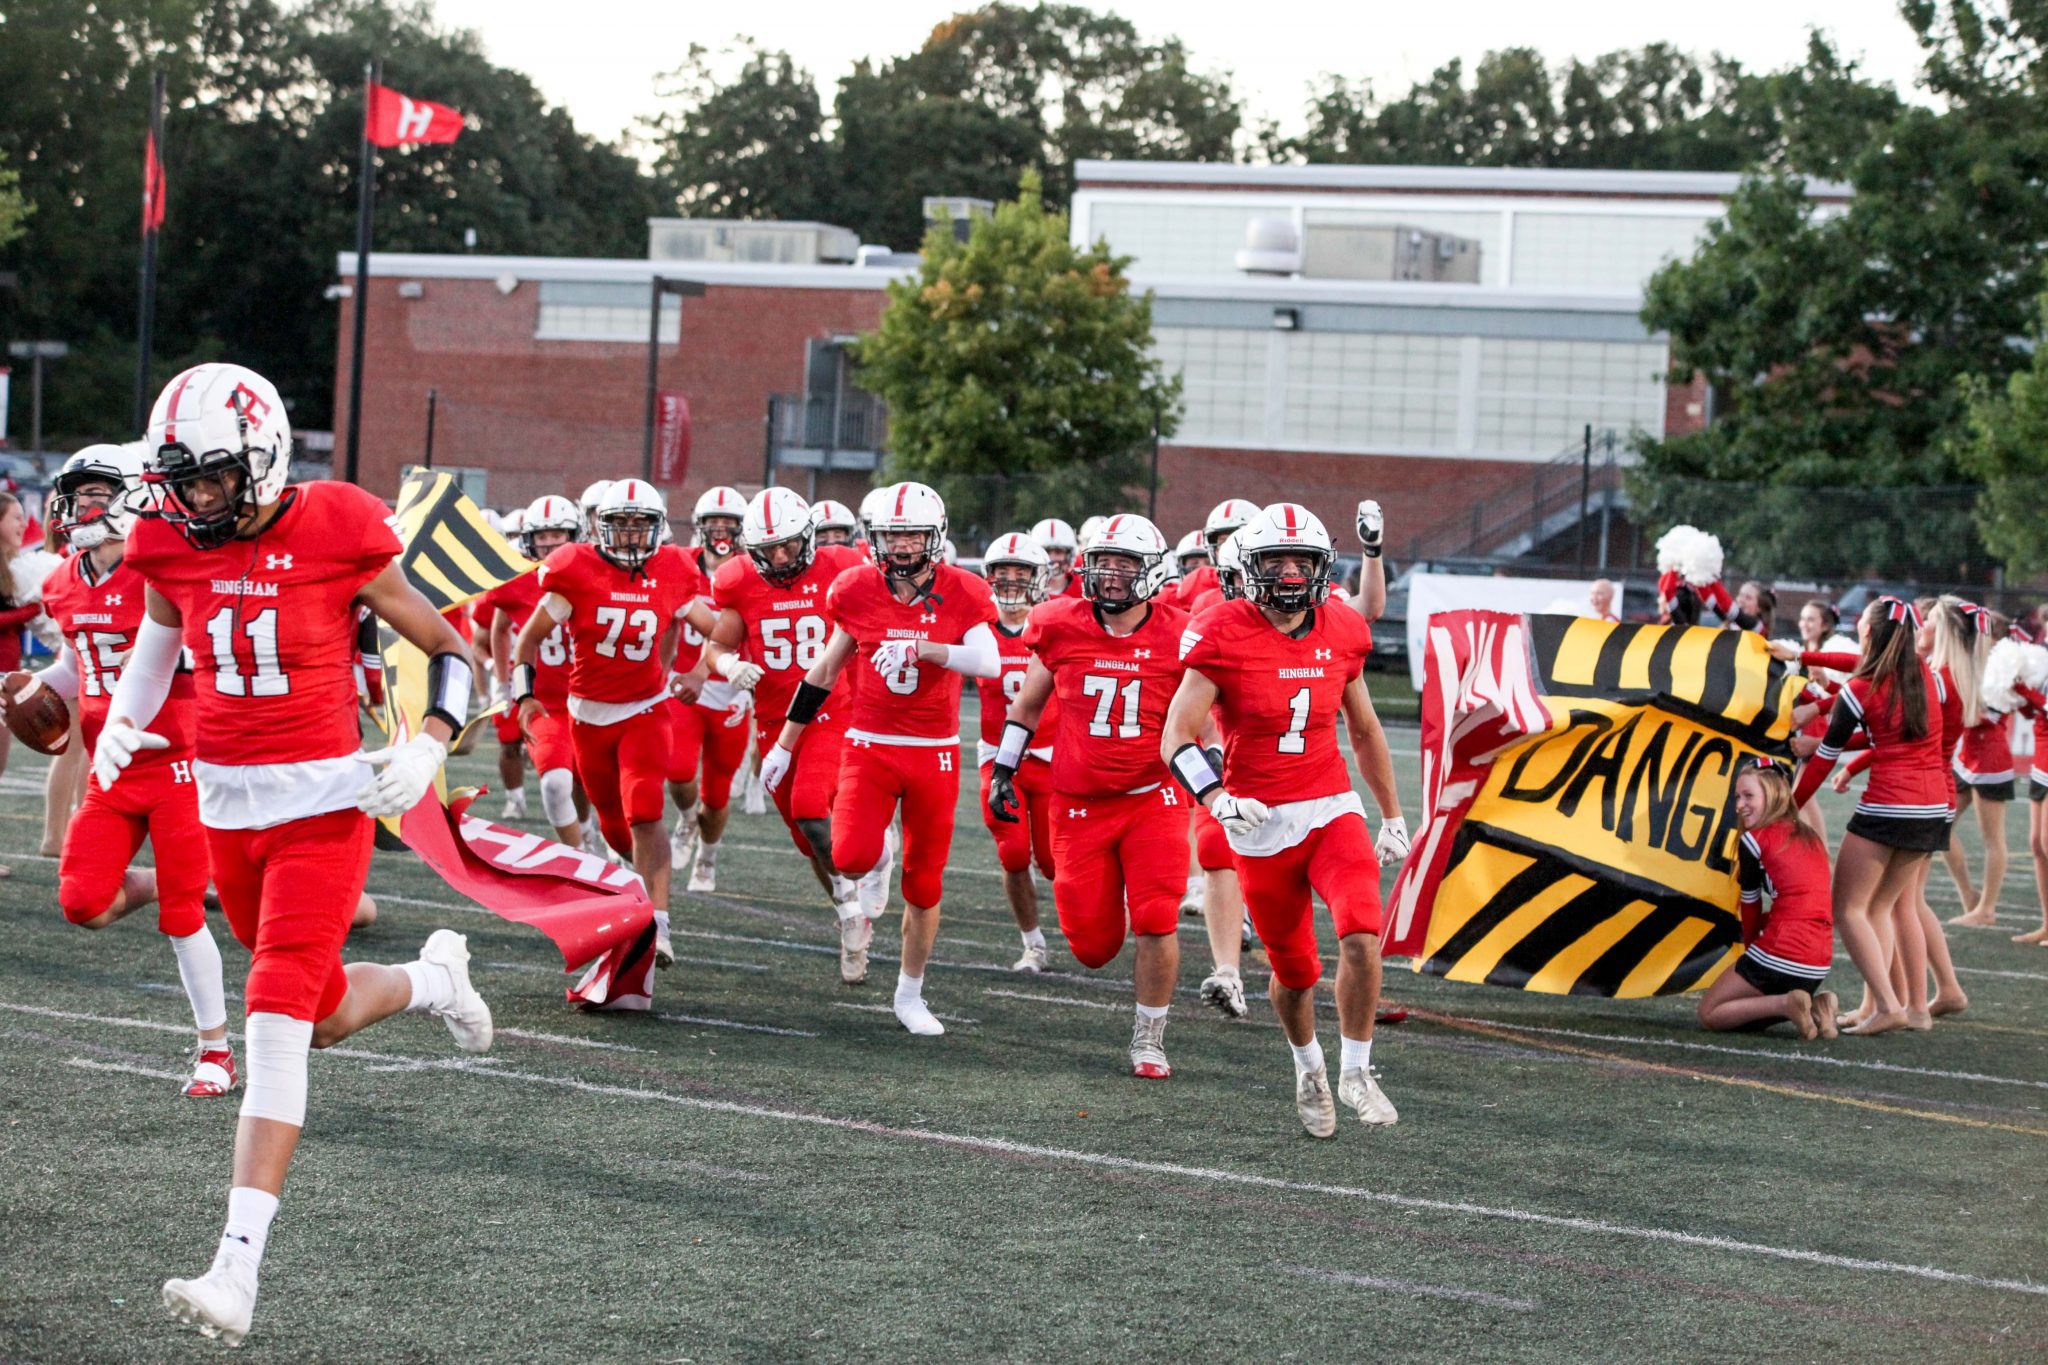 The Hingham Harbormen took the field for the first time this season on Friday night in a big win vs Braintree.